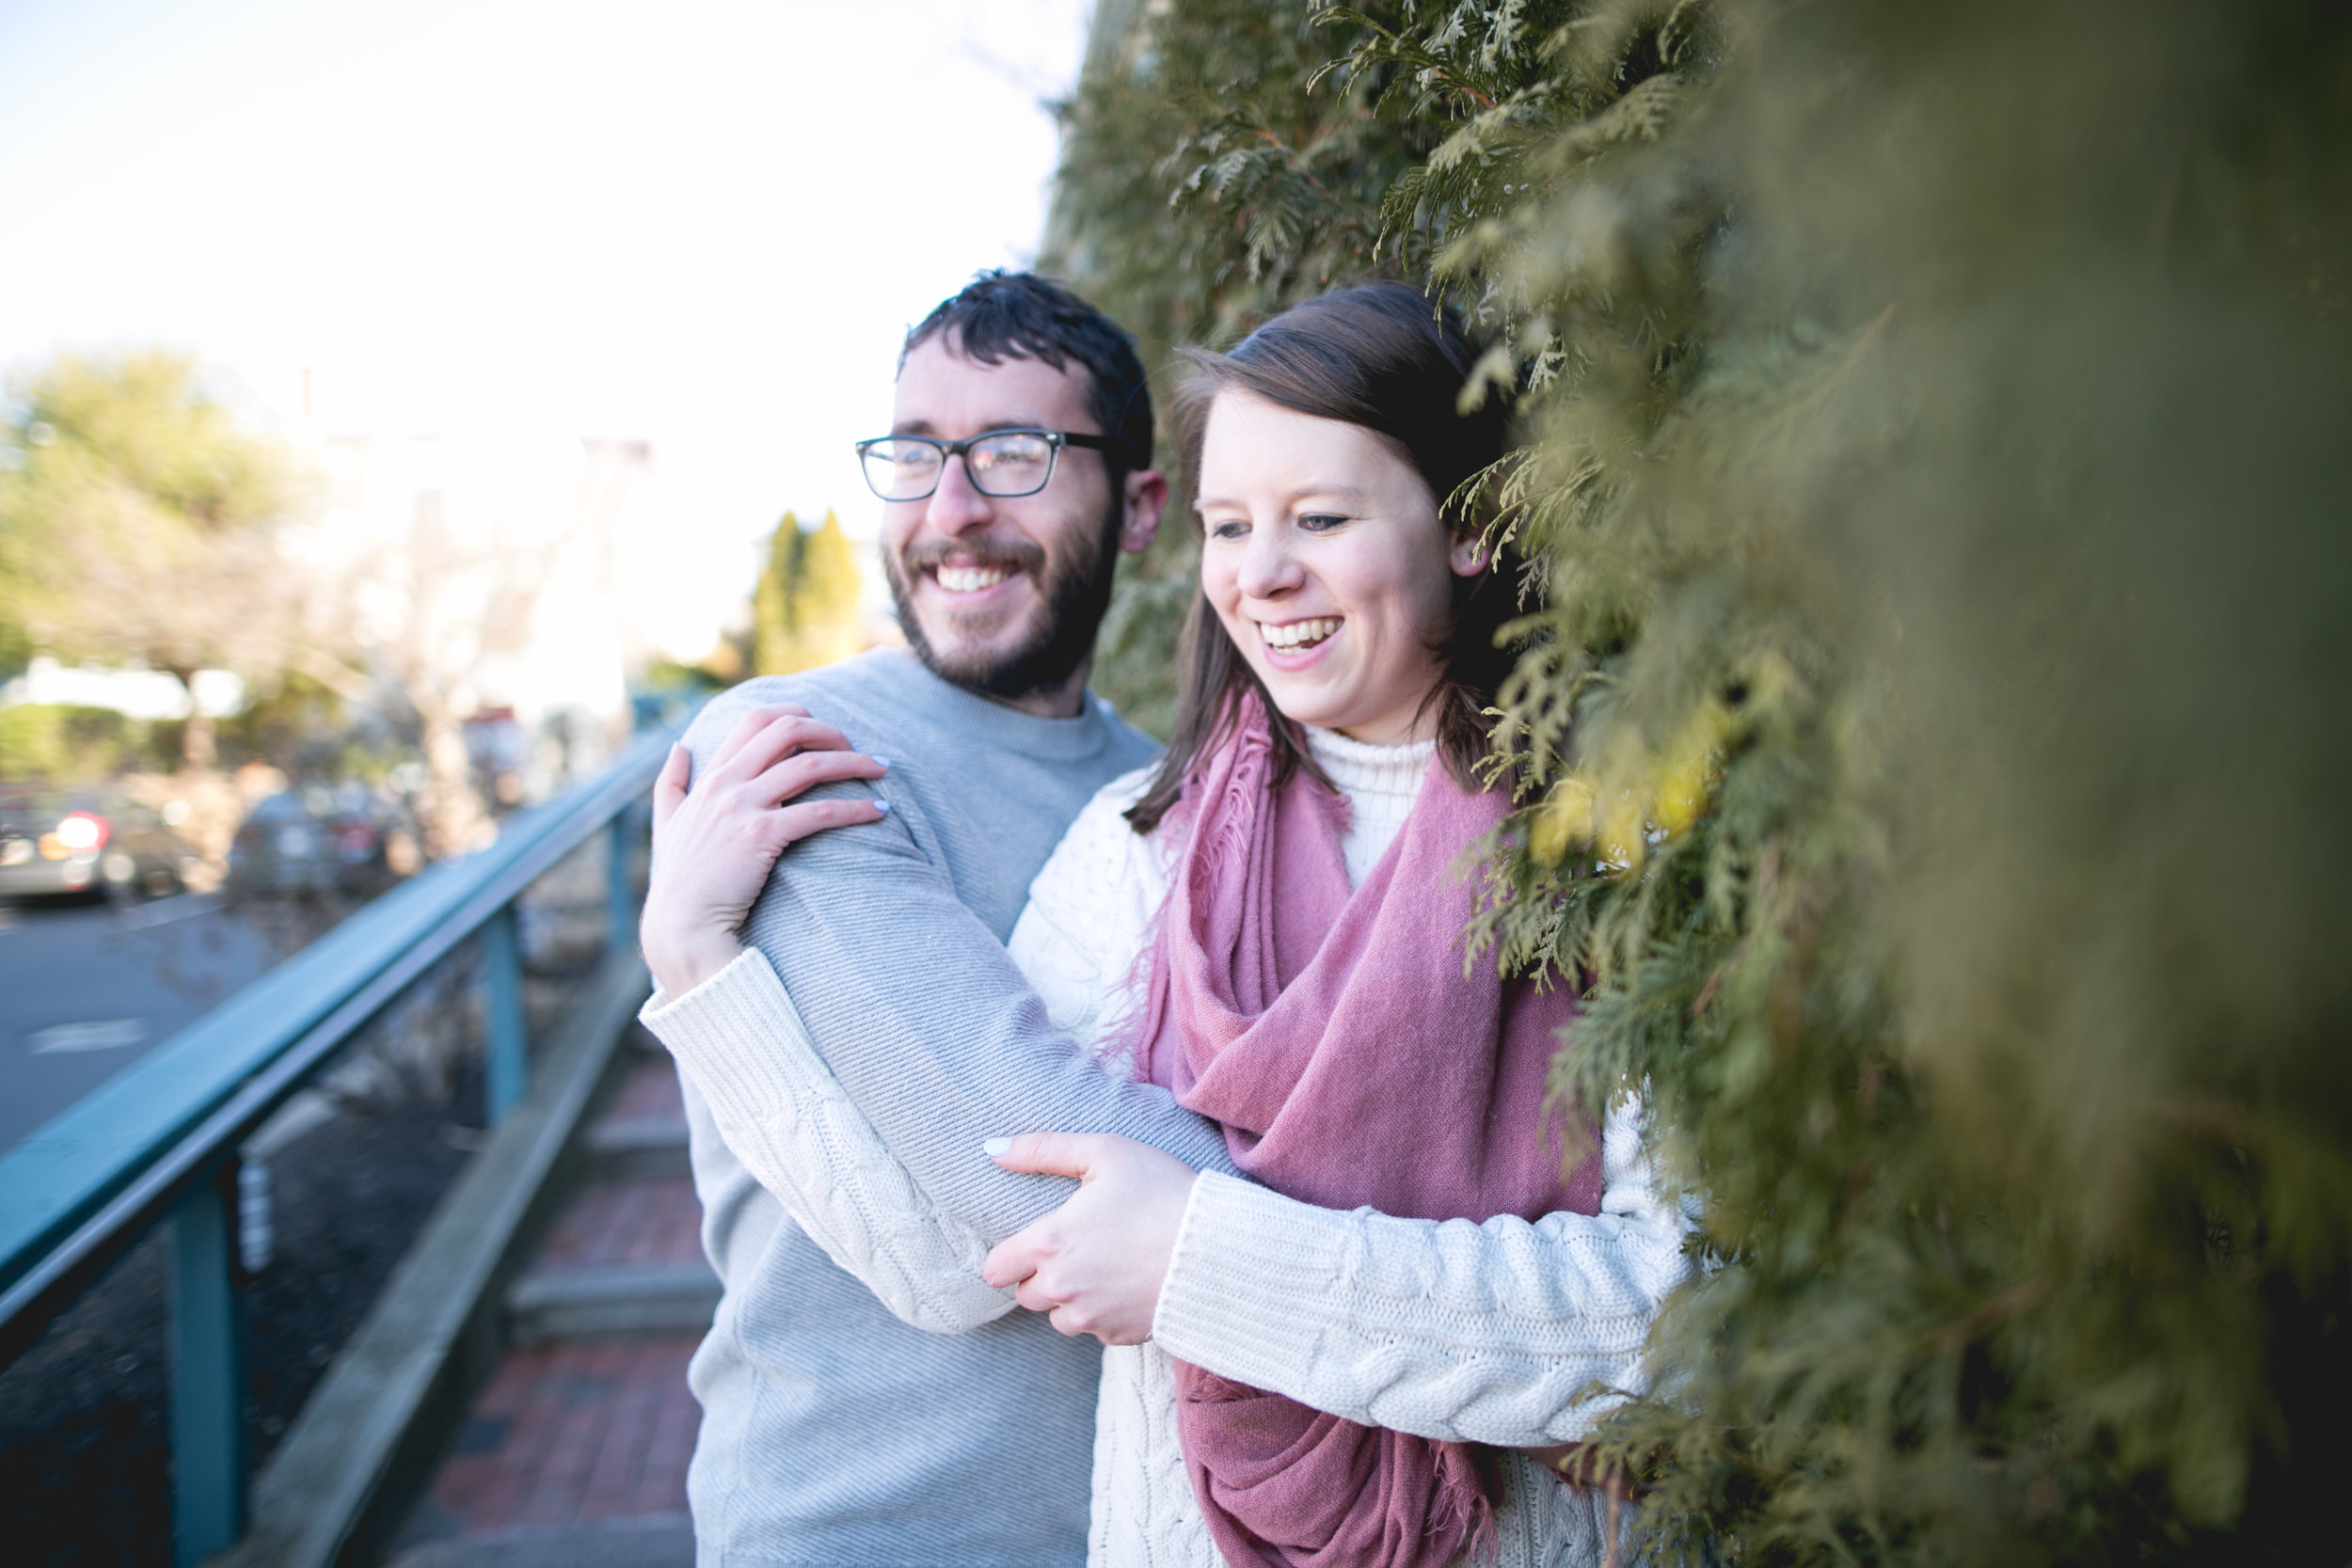 Isaac Newtons Newtown PA Engagement Session 7